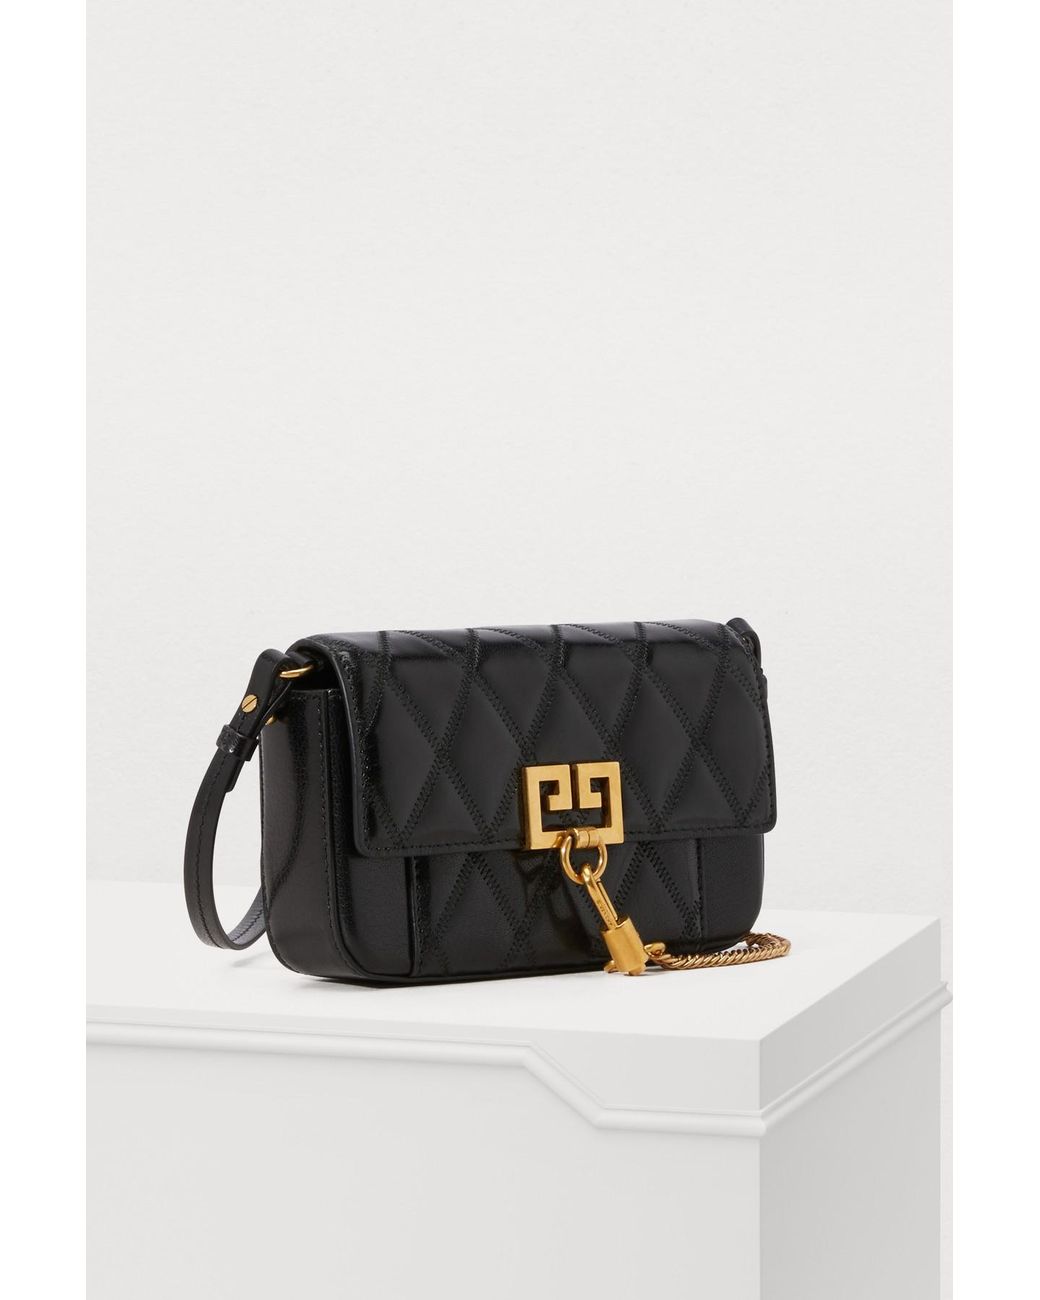 Givenchy Mini Pocket Bag In Diamond Quilted Leather in Black | Lyst